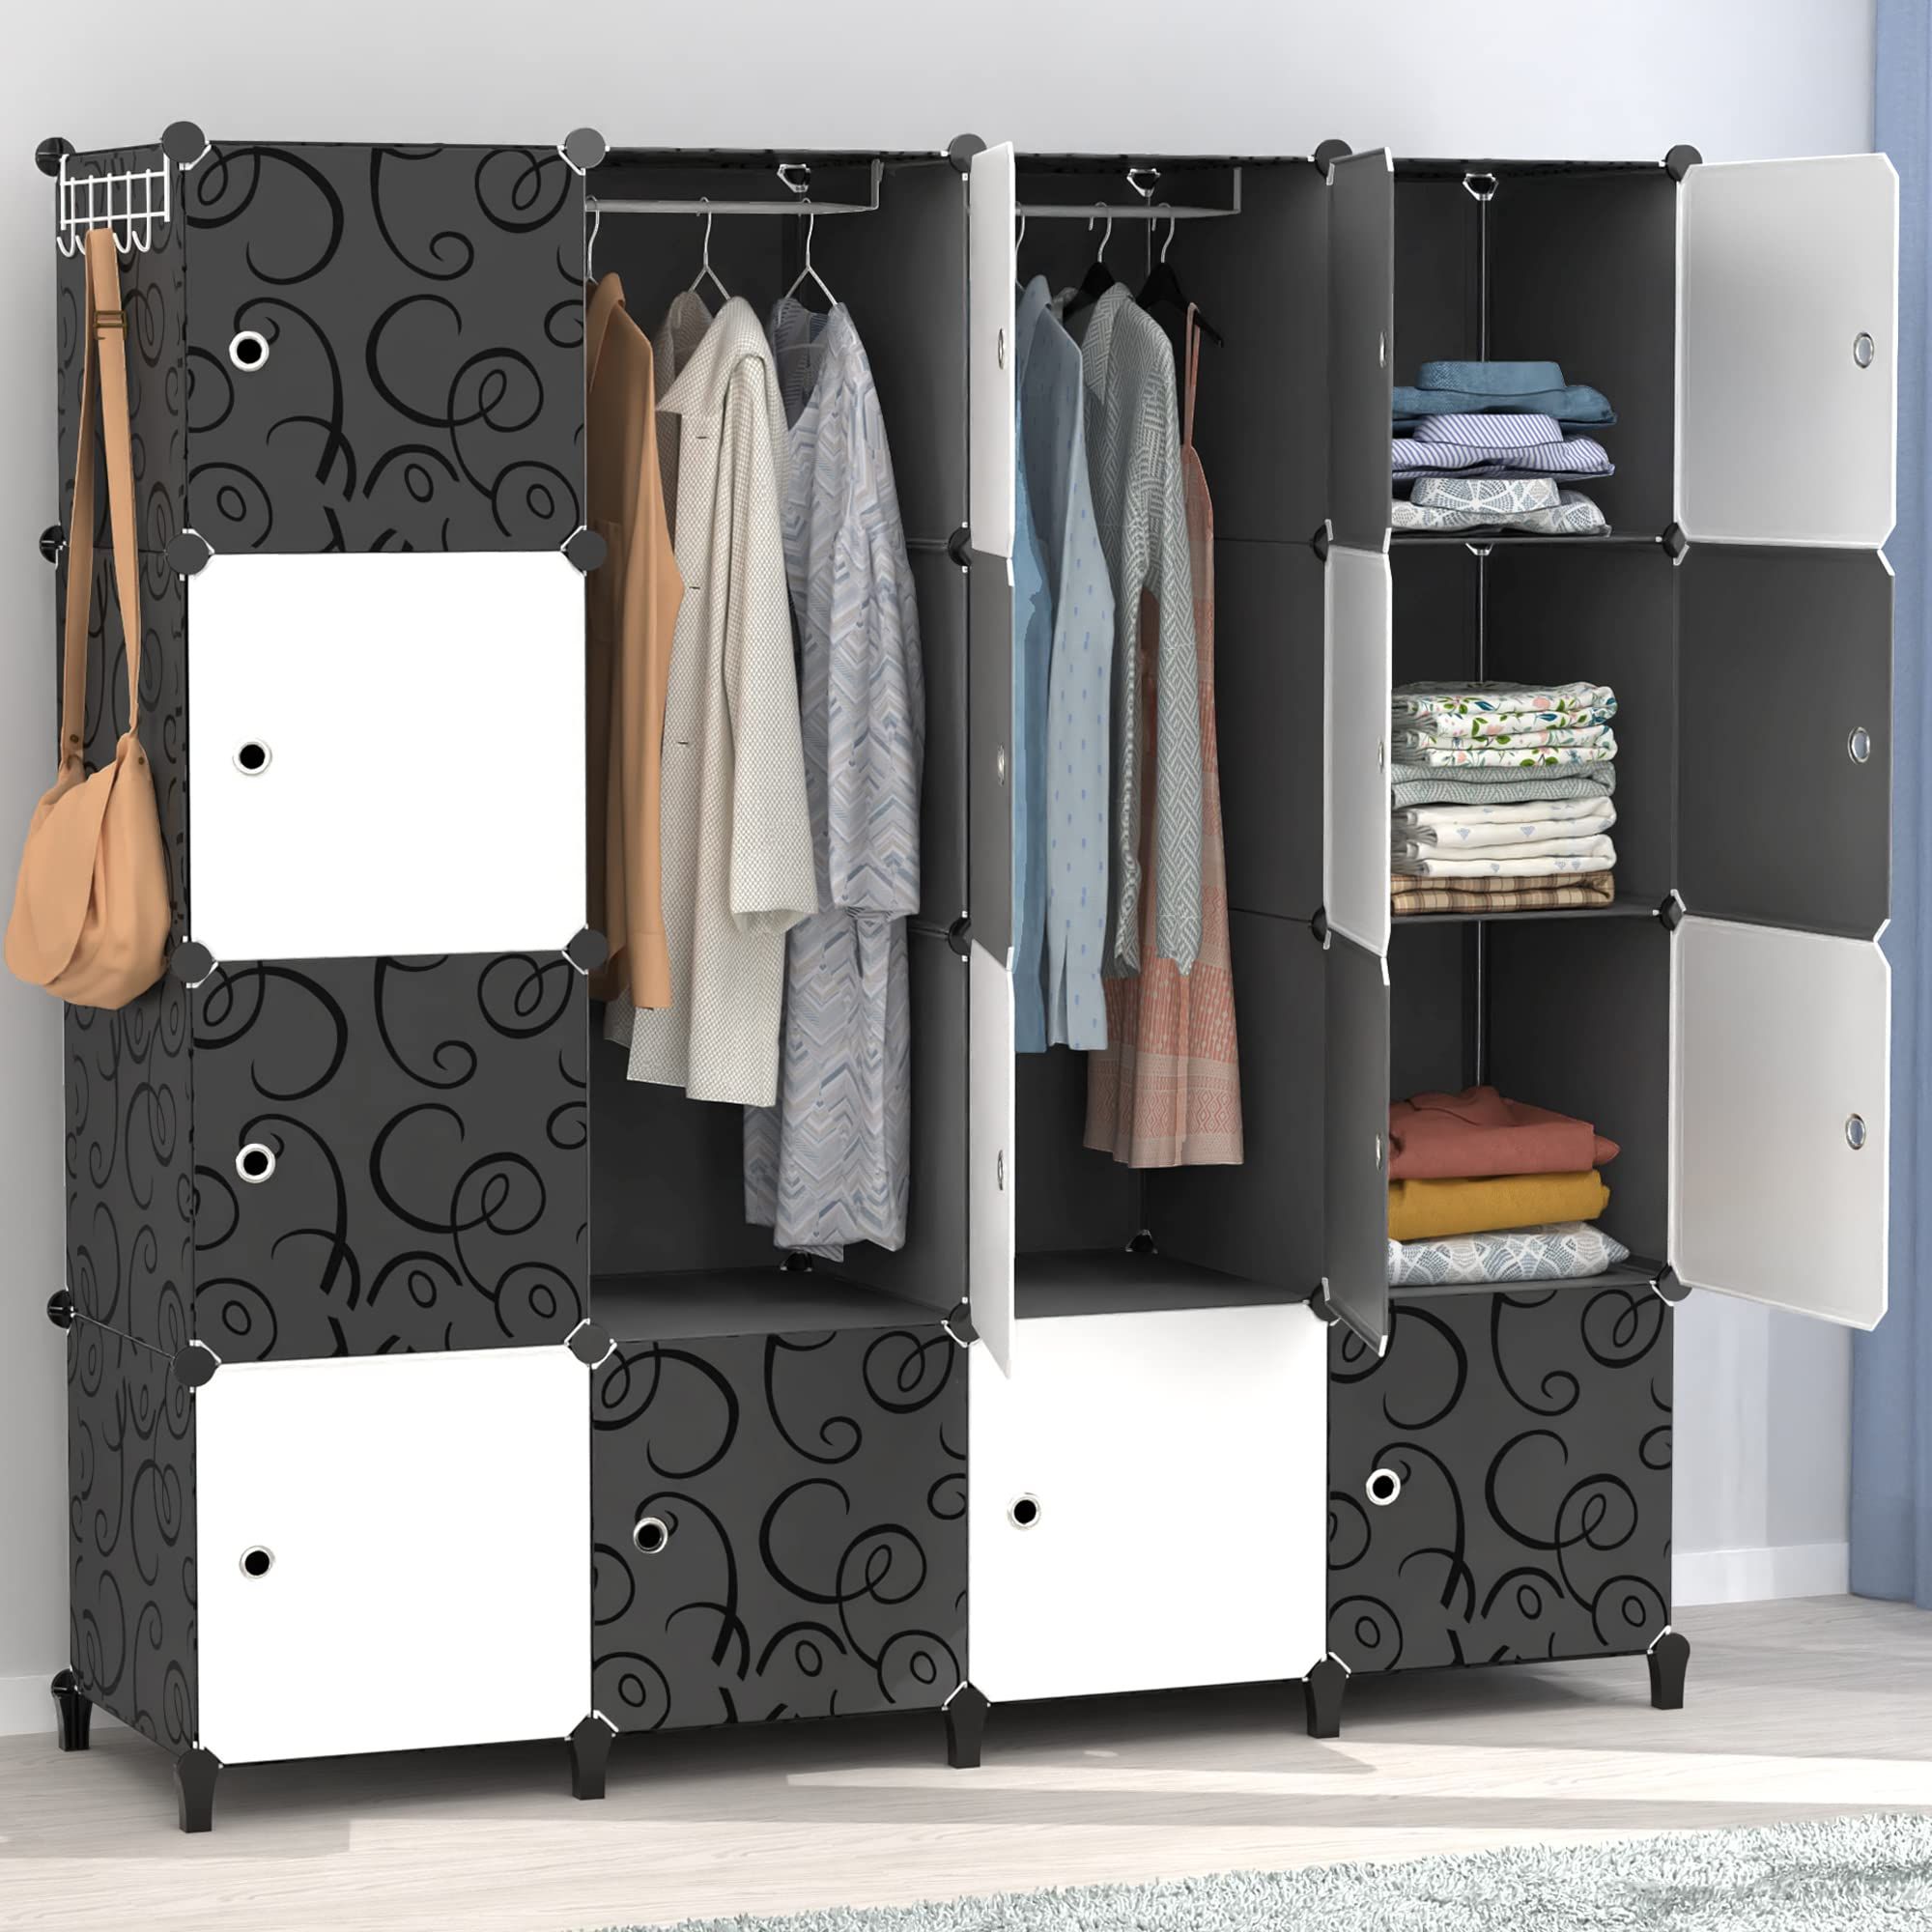 Famous Homidec Portable Wardrobe 16 Cube Foldable Closet W/ 3 Clothes Hanging  Rails, Deeper Cube Modular Cabinet Storage Organizer Shelfbedroom Clothes  Shoes Toys, Flower Pattern, Black & White (yg16hb) : Amazon.co (View 6 of 10)